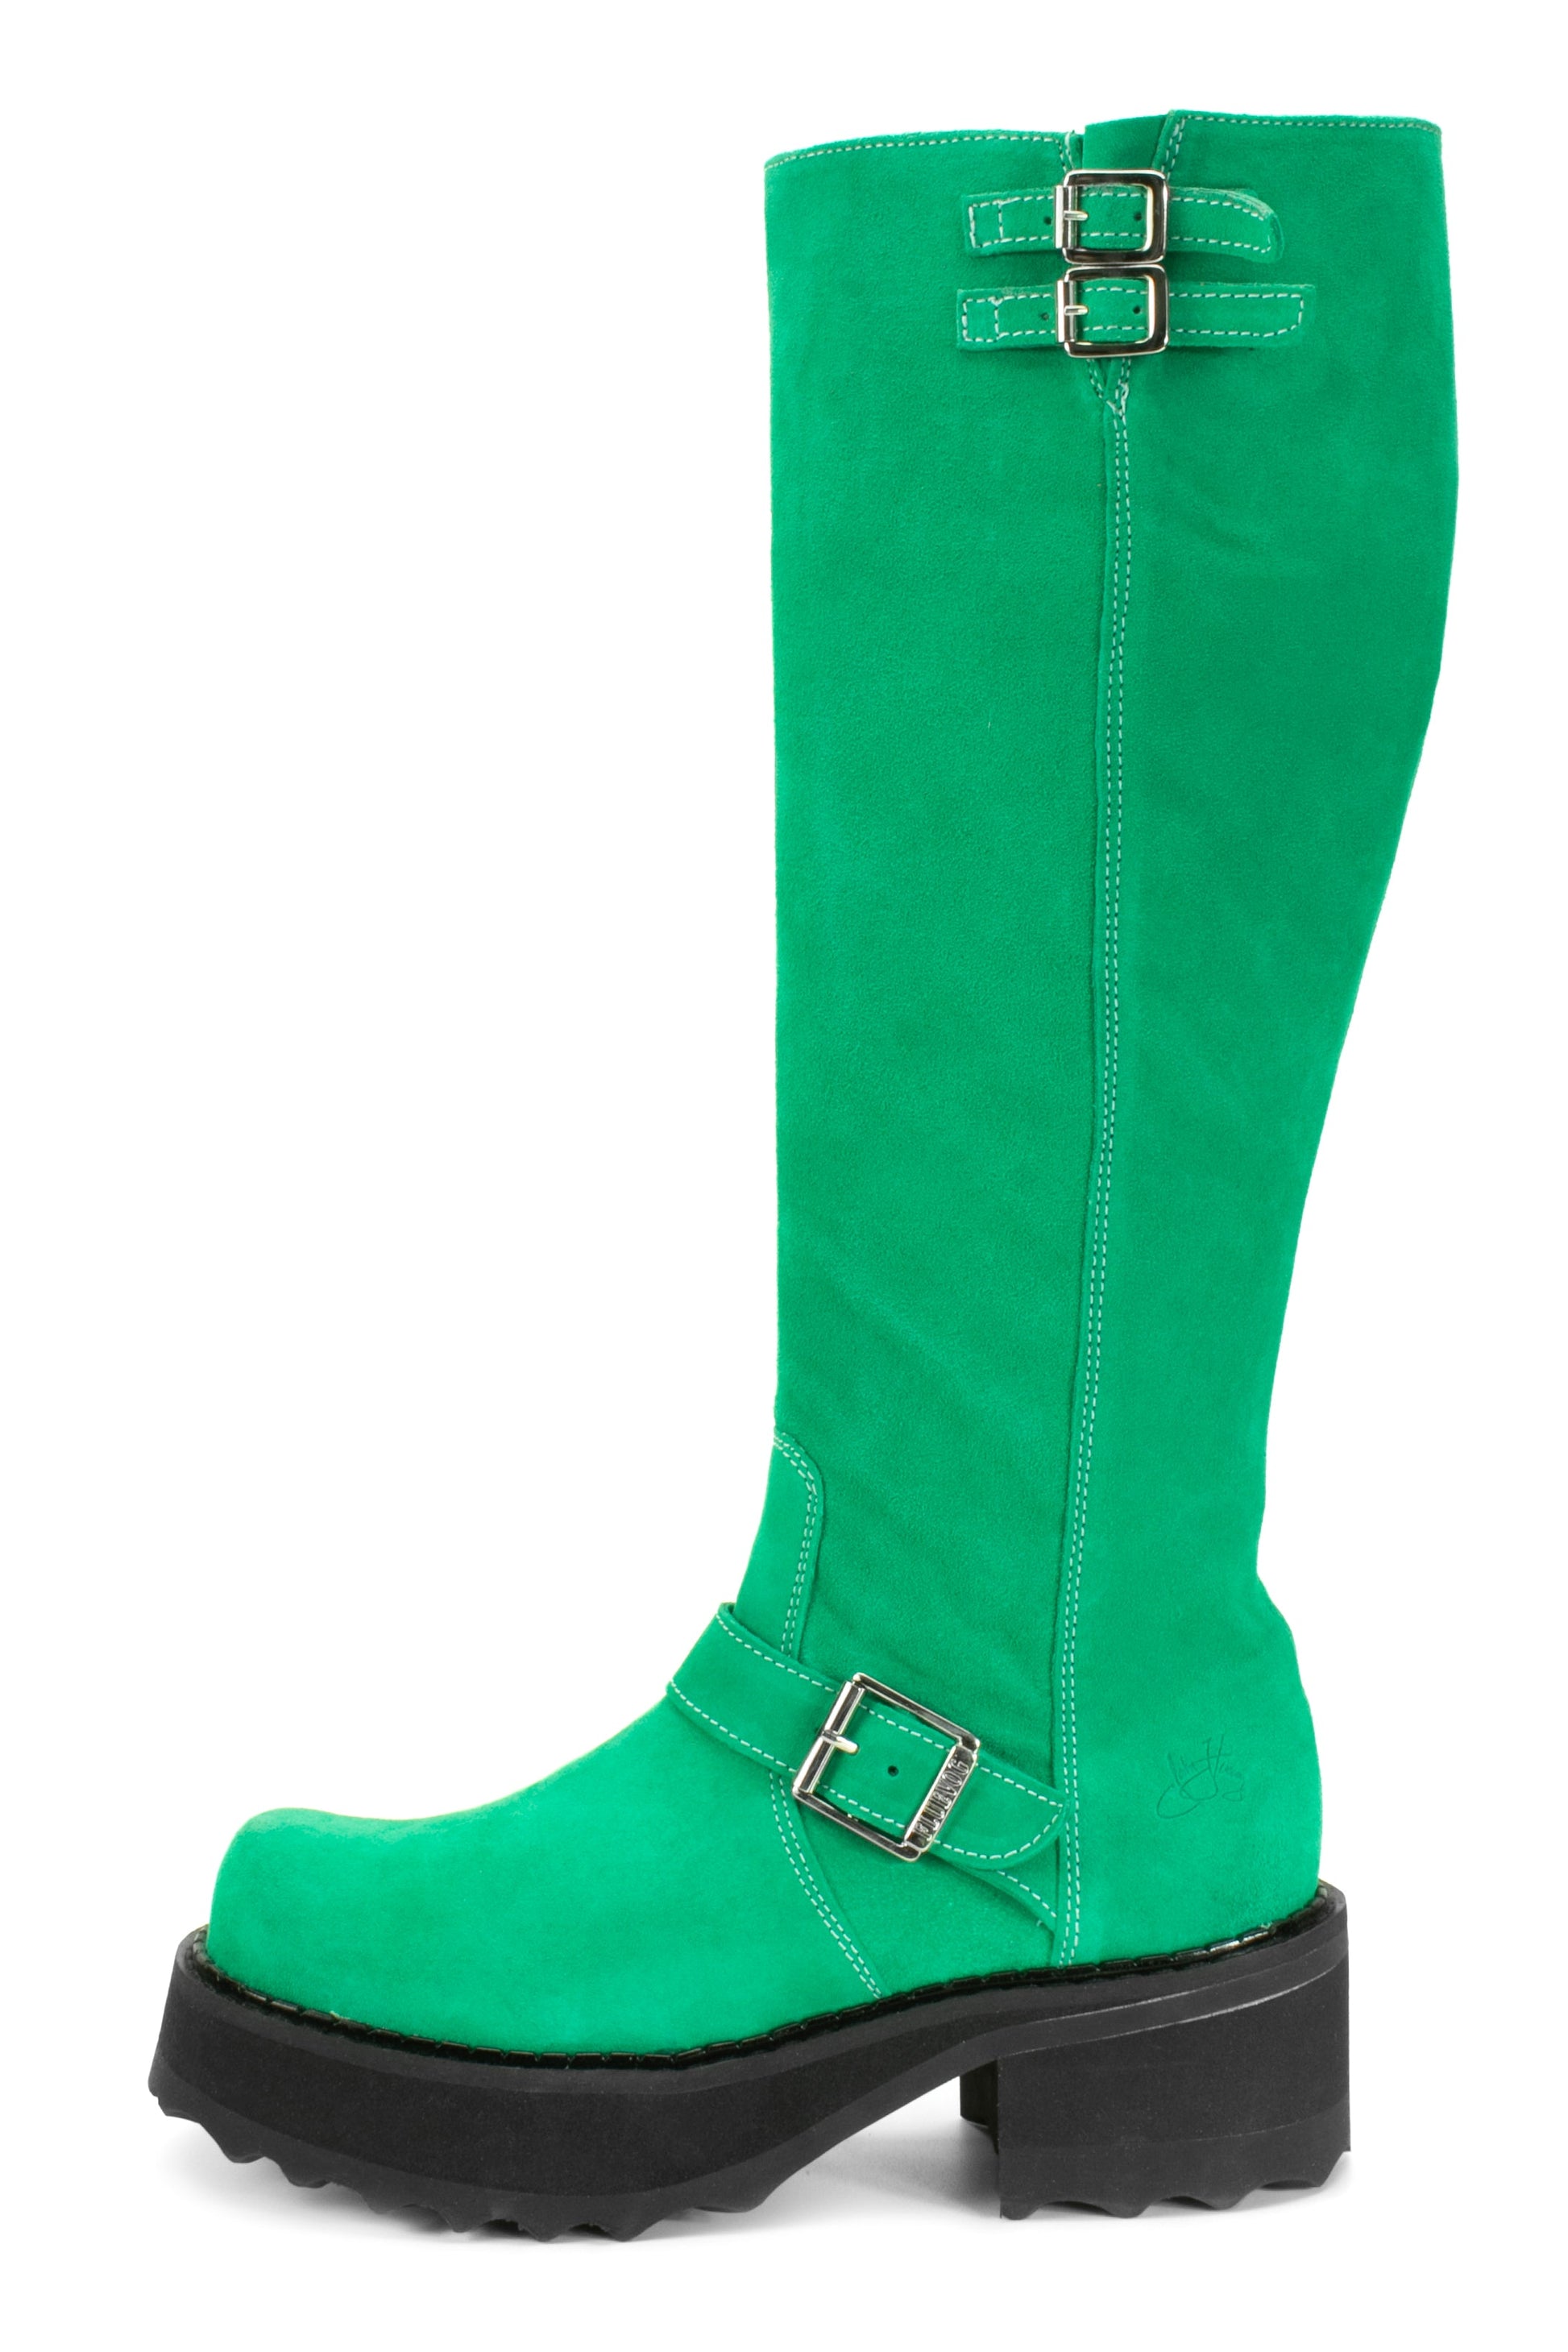 Green suede Boot, under-the-knee-high, black high sole, green stiches for highlight